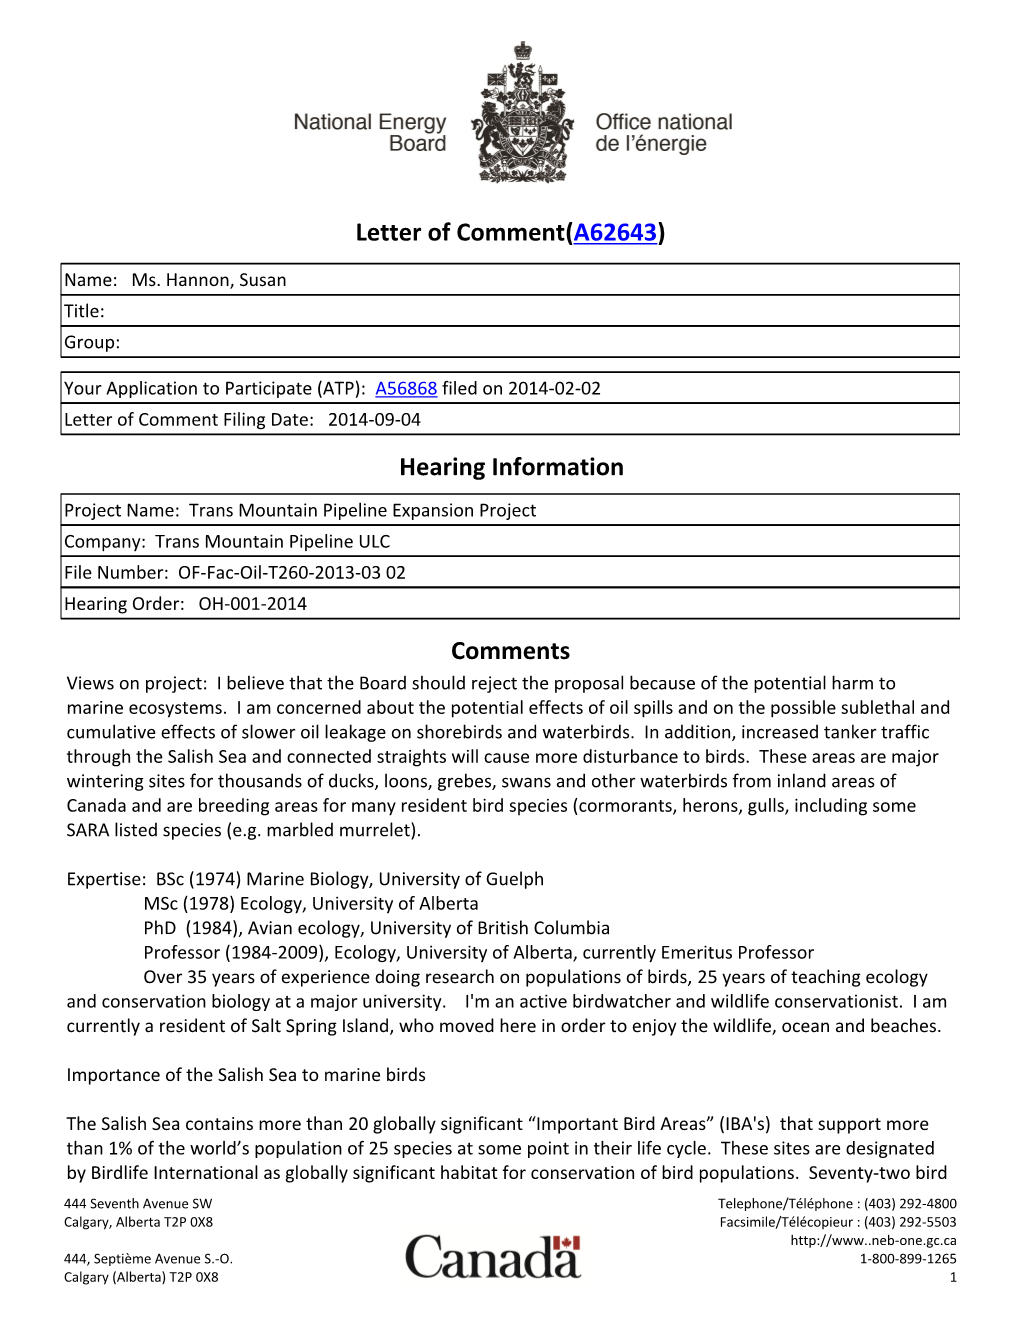 Letter of Comment(A62643) Hearing Information Comments